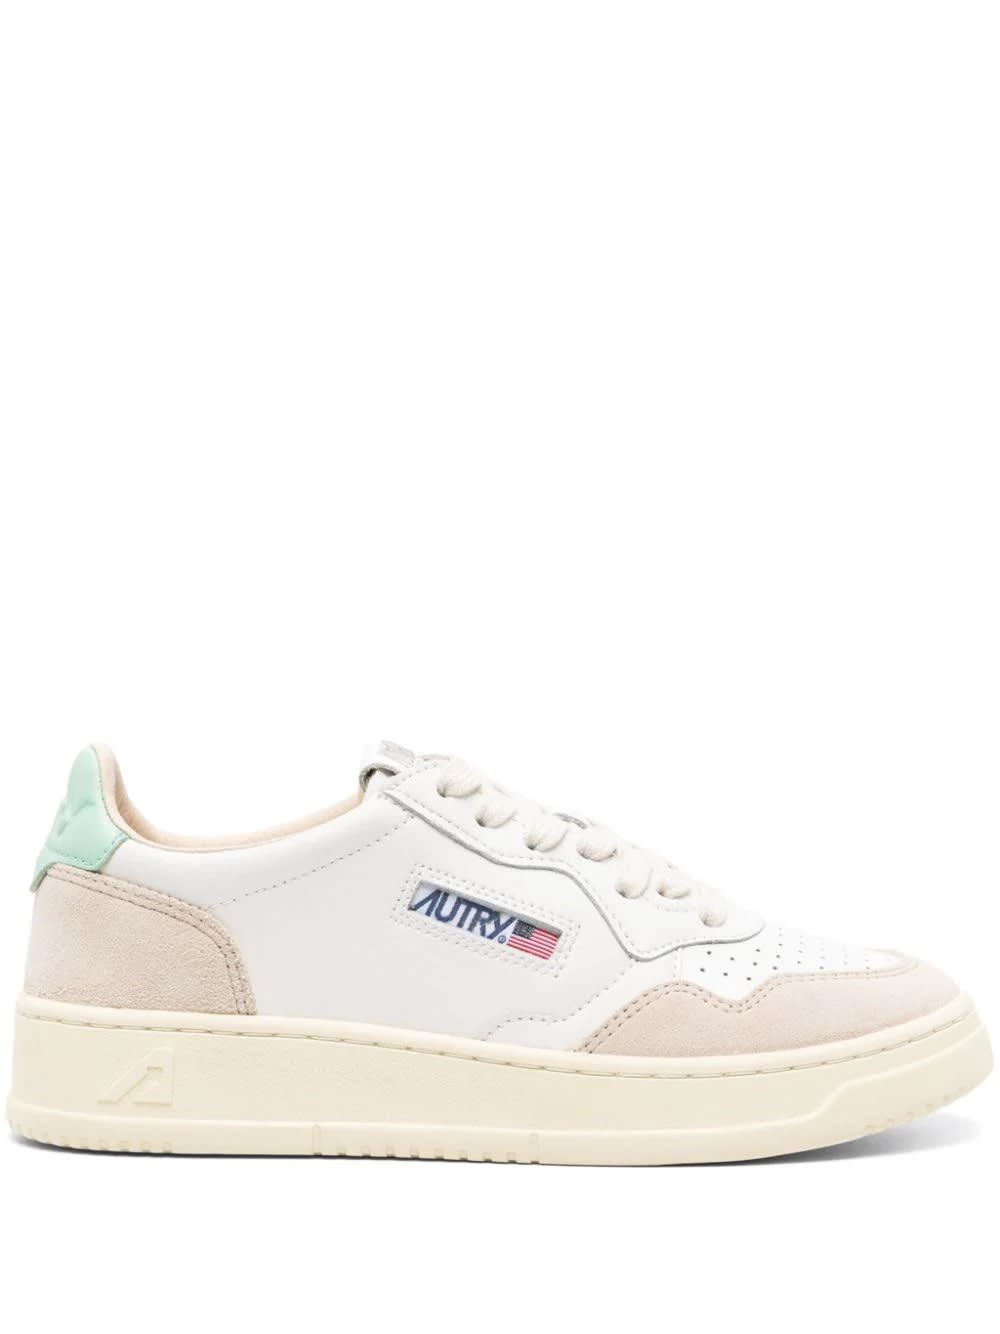 Autry Medalist Low Sneakers In White And Aqua Green Suede And Leather